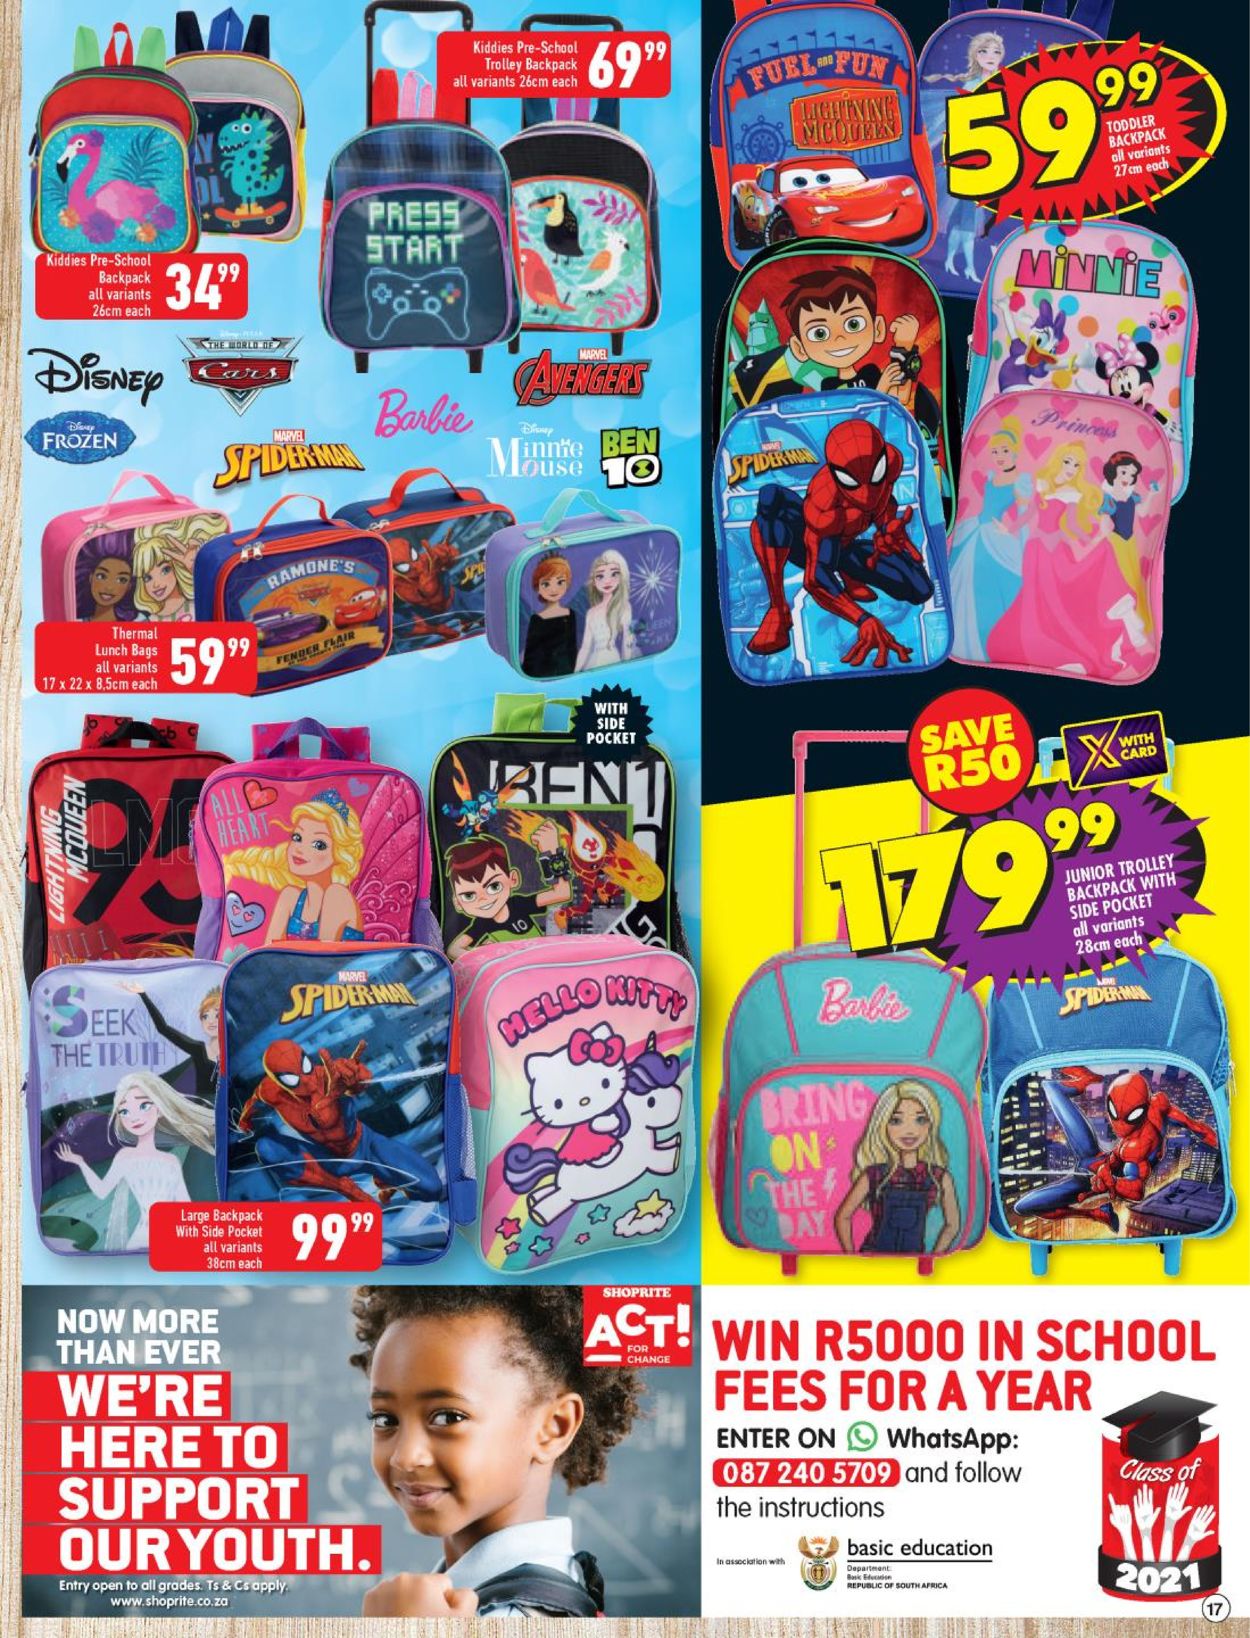 Shoprite Back to School 2021 Current catalogue 2021/01/04 2021/02/21 [17]